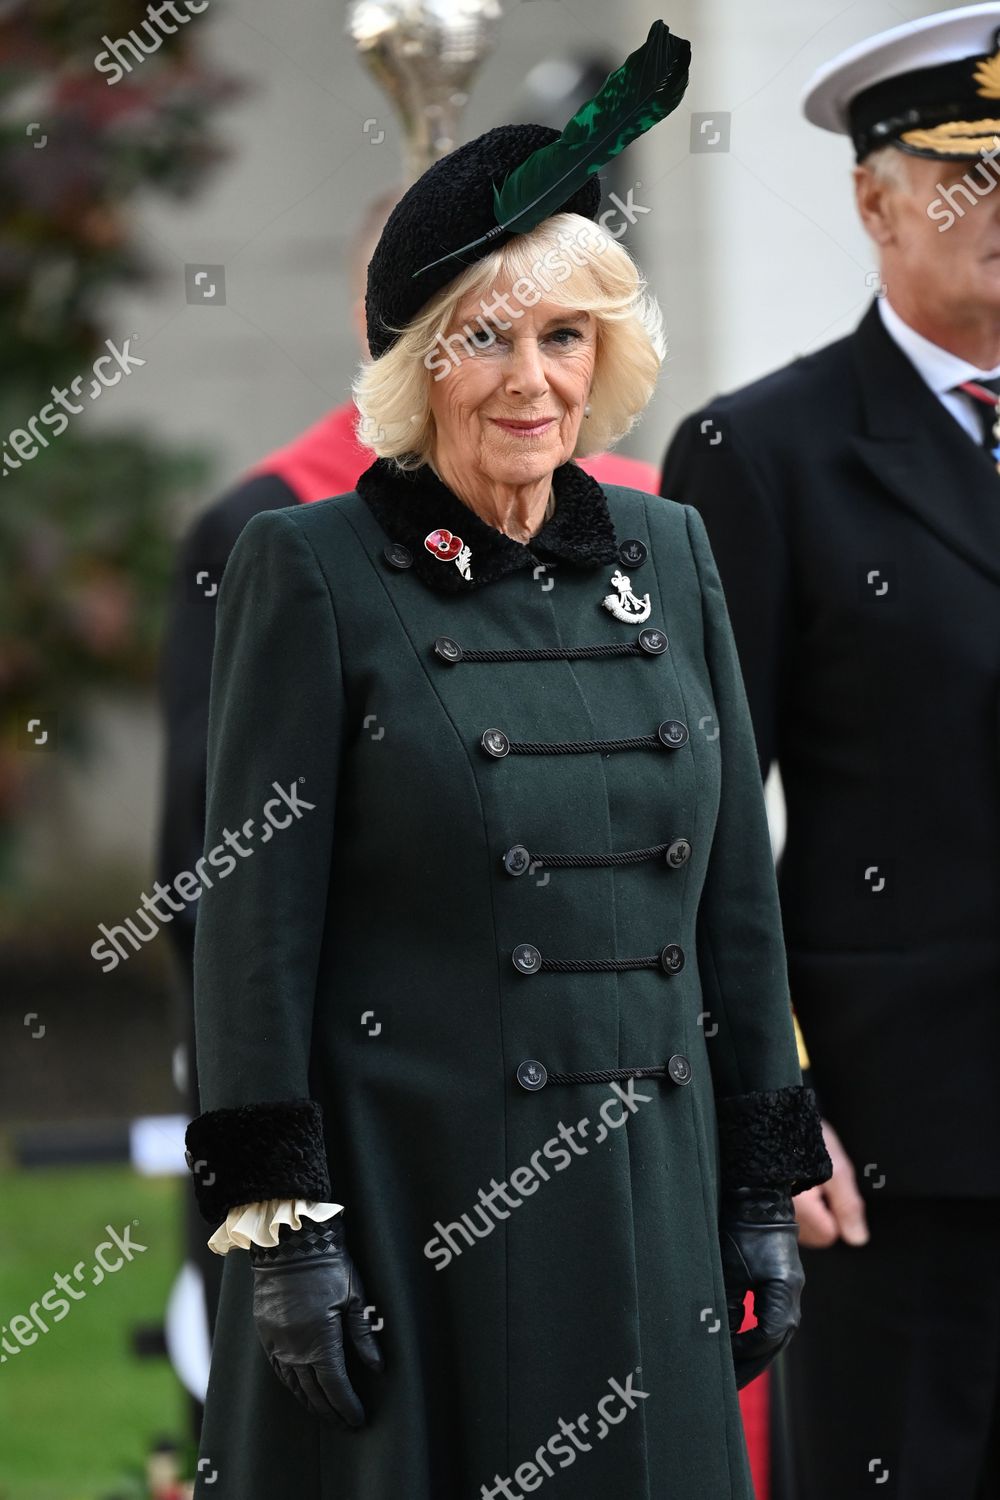 camilla-duchess-of-cornwall-attends-92nd-field-of-remembrance-at-westminster-abbey-london-uk-shutterstock-editorial-10995712c.jpg